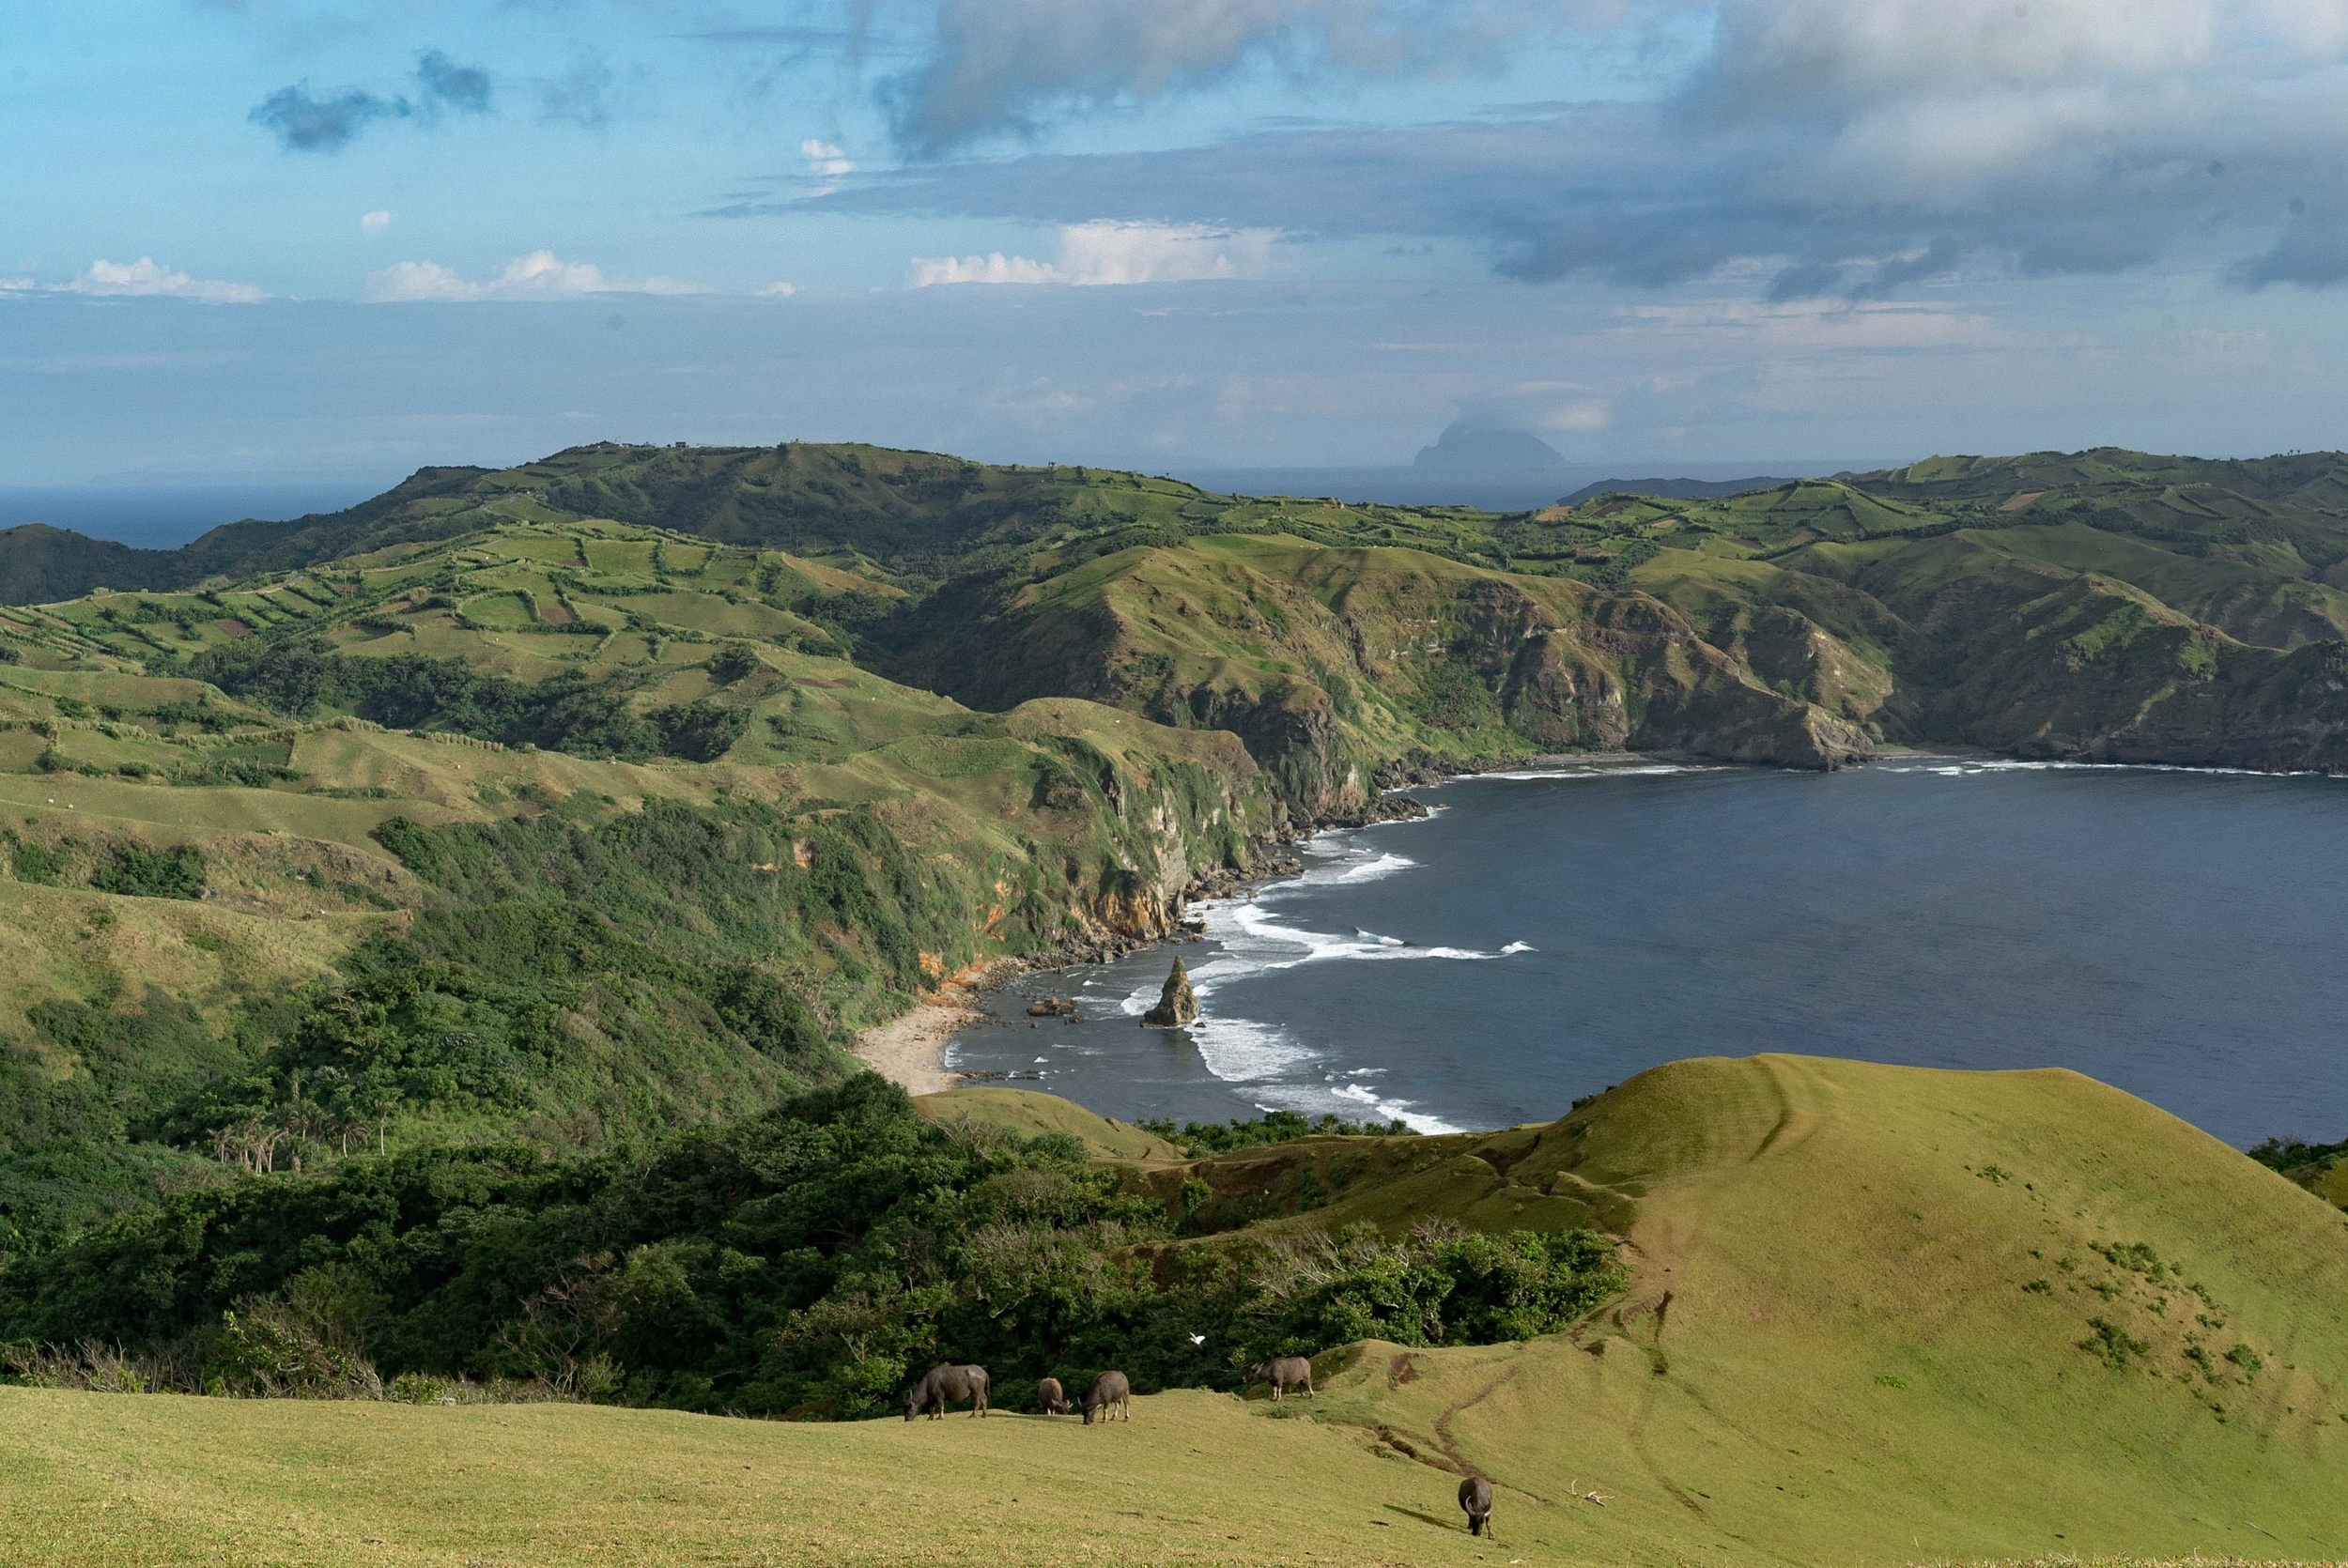  Batanes is the northernmost province in the Philippines. 